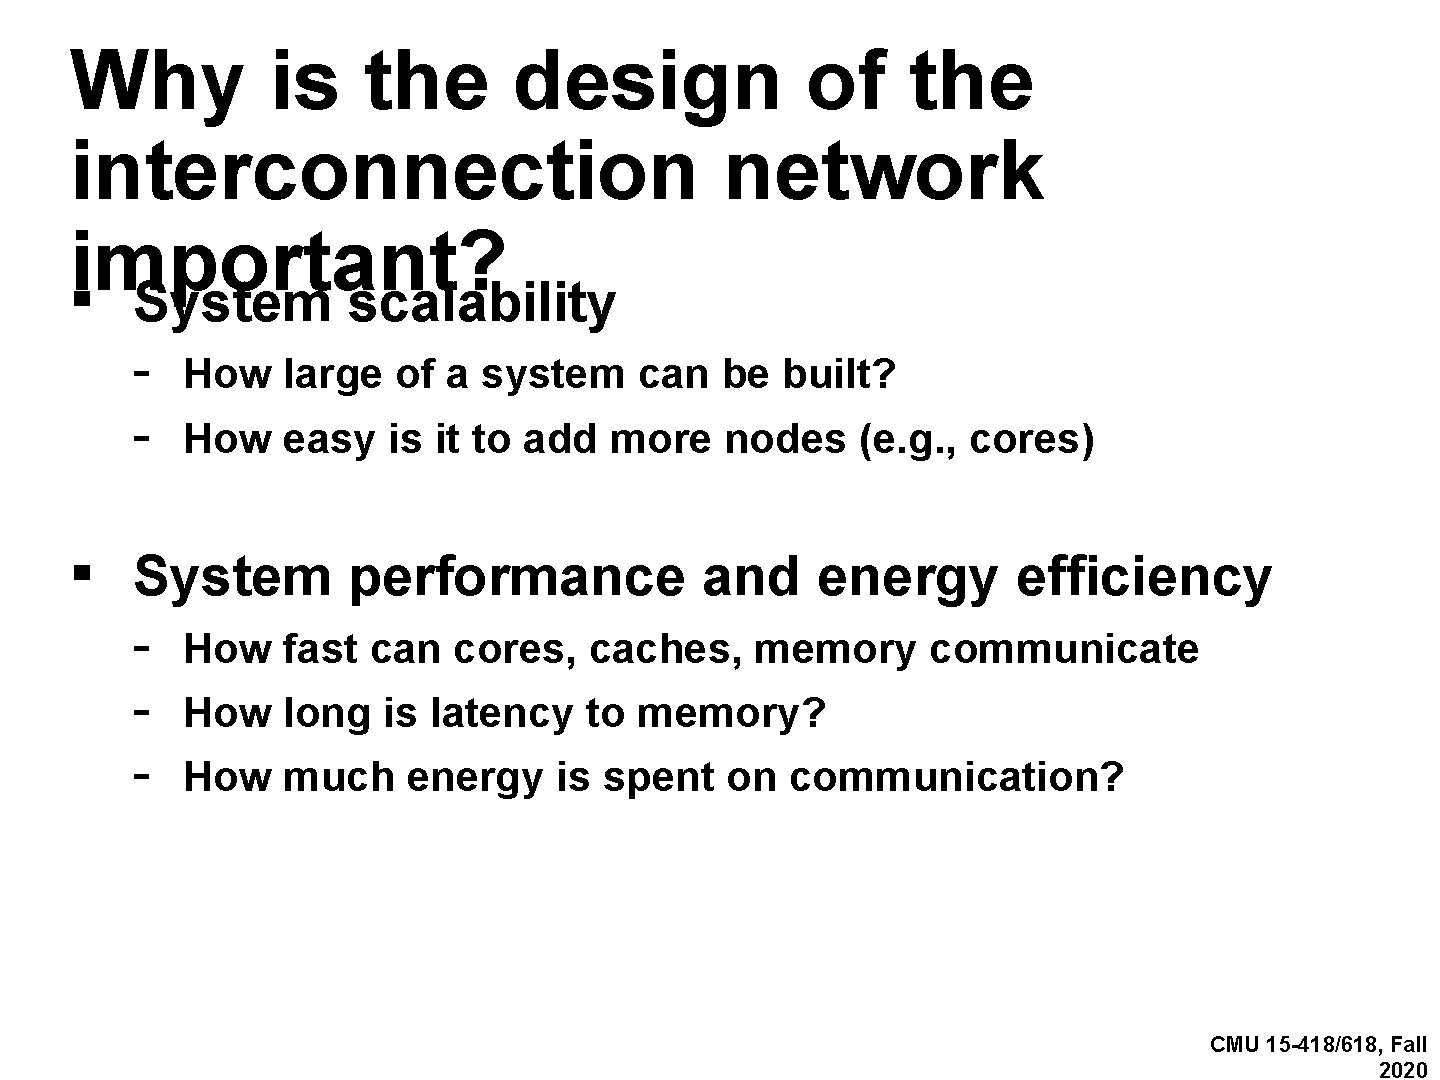 Why is the design of the interconnection network important? ▪ System scalability - How